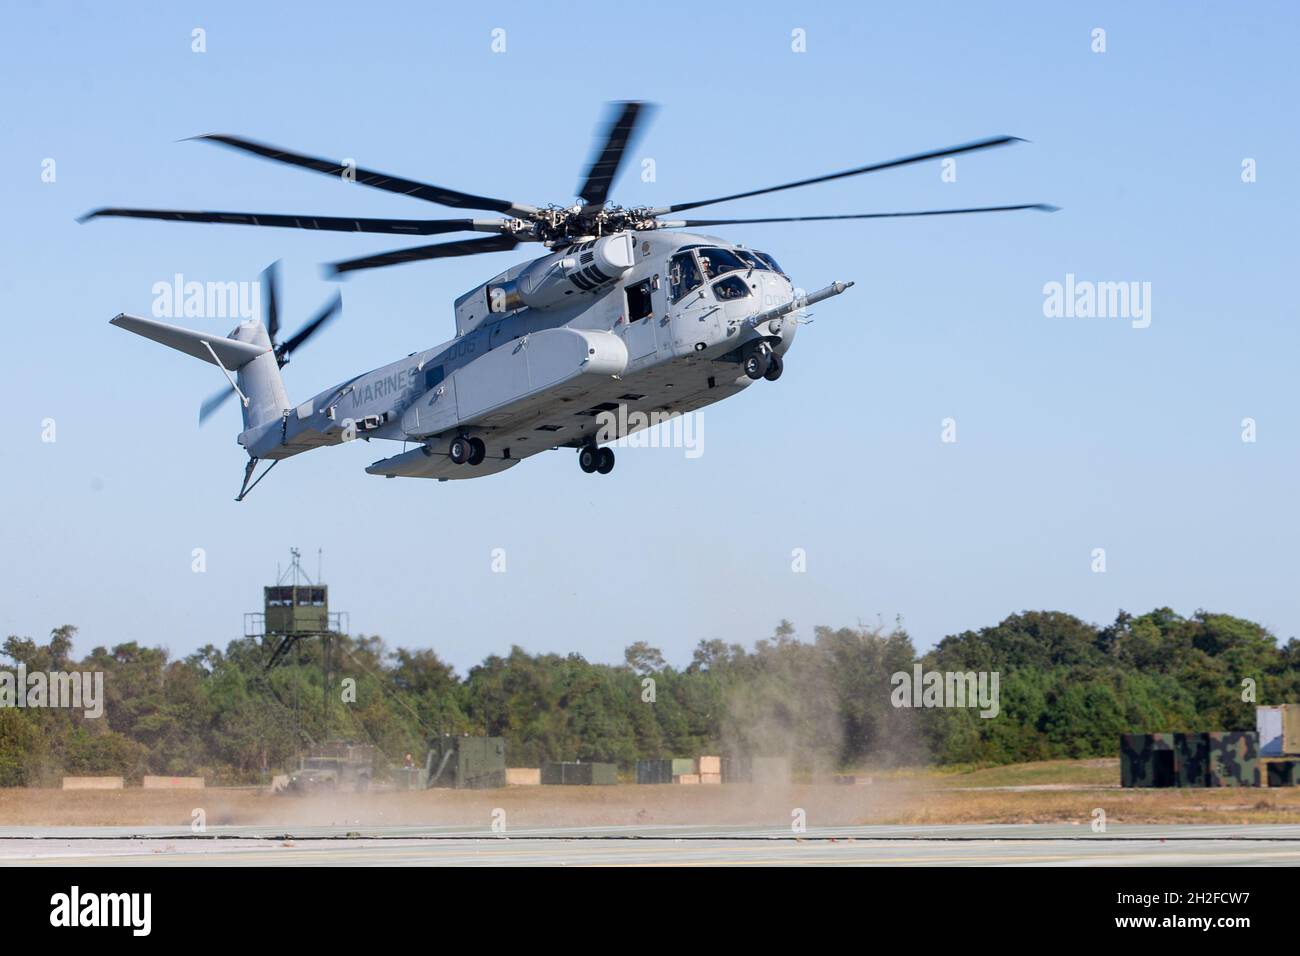 A CH-53K King Stallion assigned to Marine Operational Test and Evaluation Squadron (VMX) 1 prepares to land at Marine Corps Auxiliary Landing Field Bogue, North Carolina, Oct. 20, 2021. The CH-53K King Stallion will replace the CH-53E Super Stallion, which has served the Marine Corps for 40 years, and will transport Marines, heavy equipment, and supplies during ship-to-shore movement in support of amphibious assault and subsequent operations ashore. (U.S. Marine Corps photo by Lance Cpl. Elias E. Pimentel III) Stock Photo